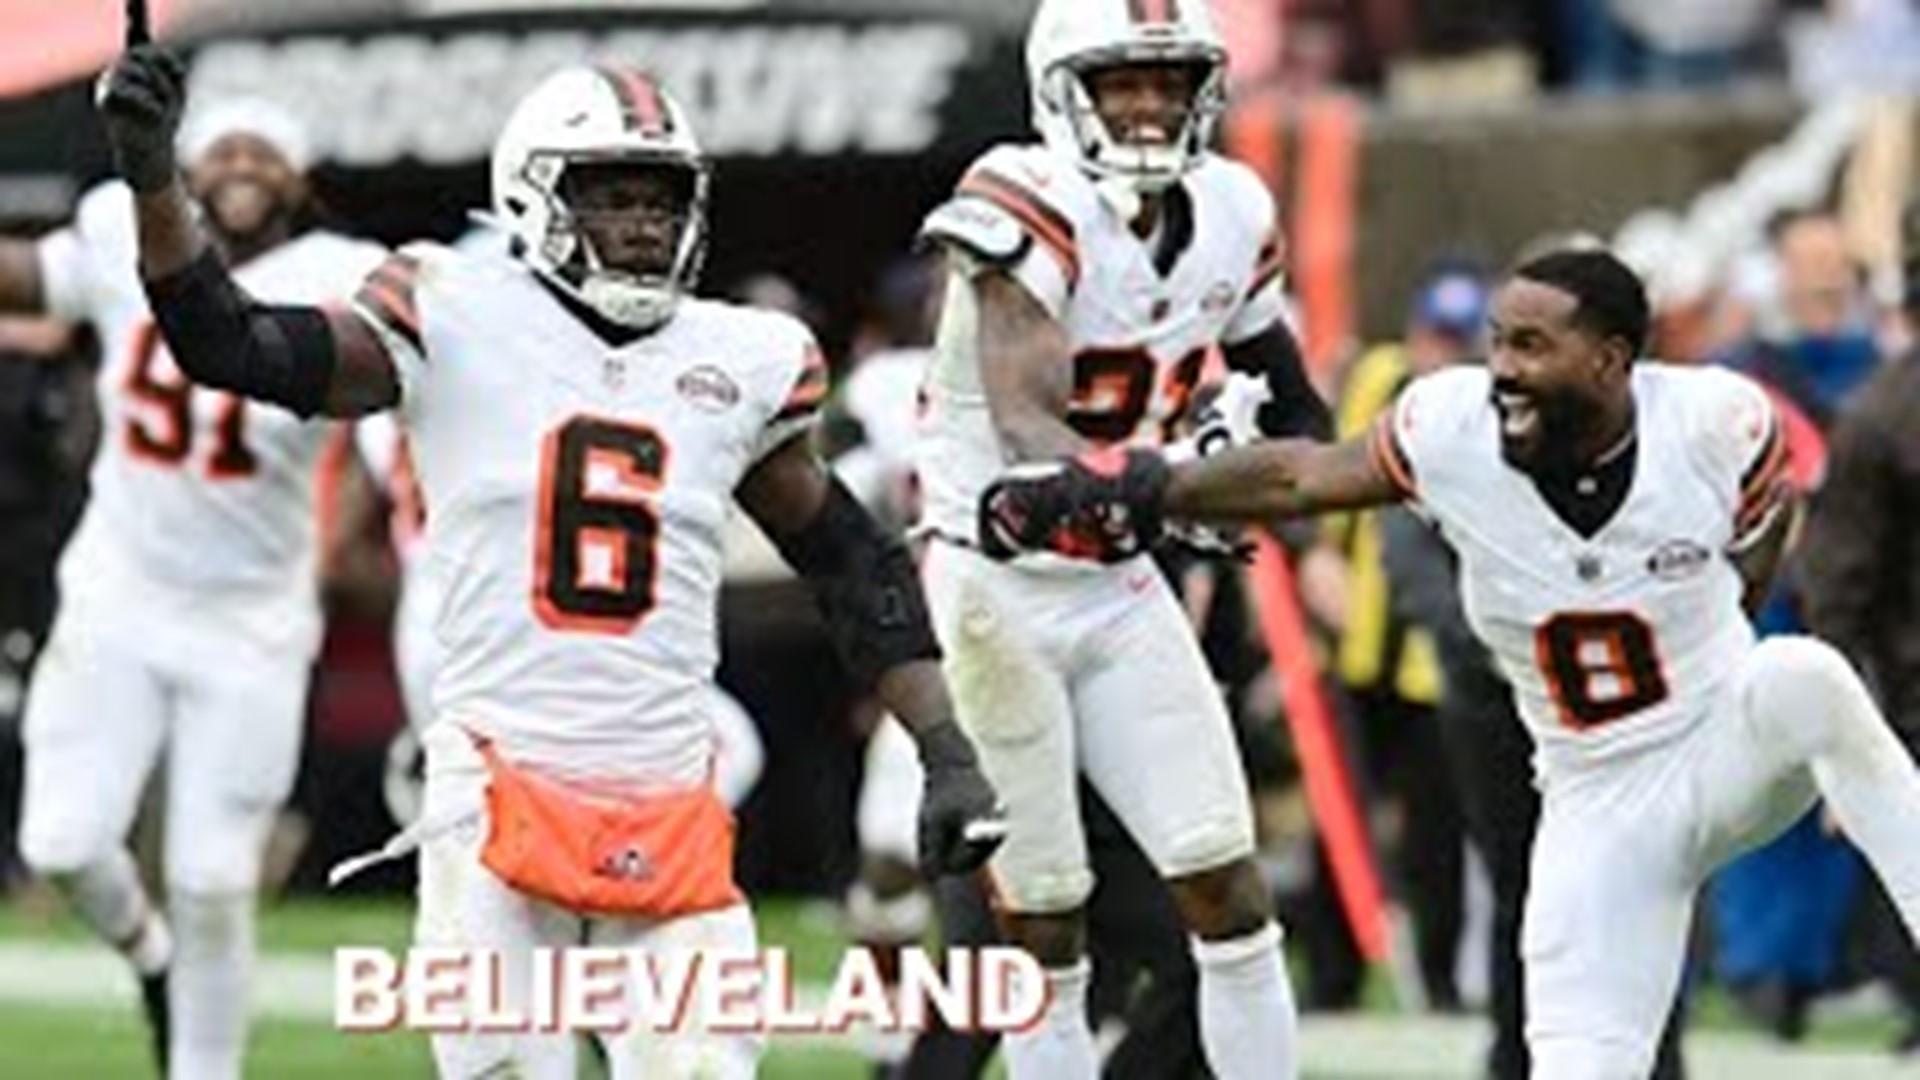 The Cleveland Browns pulled off an amazing upset Sunday handing the San Francisco their first loss the season.